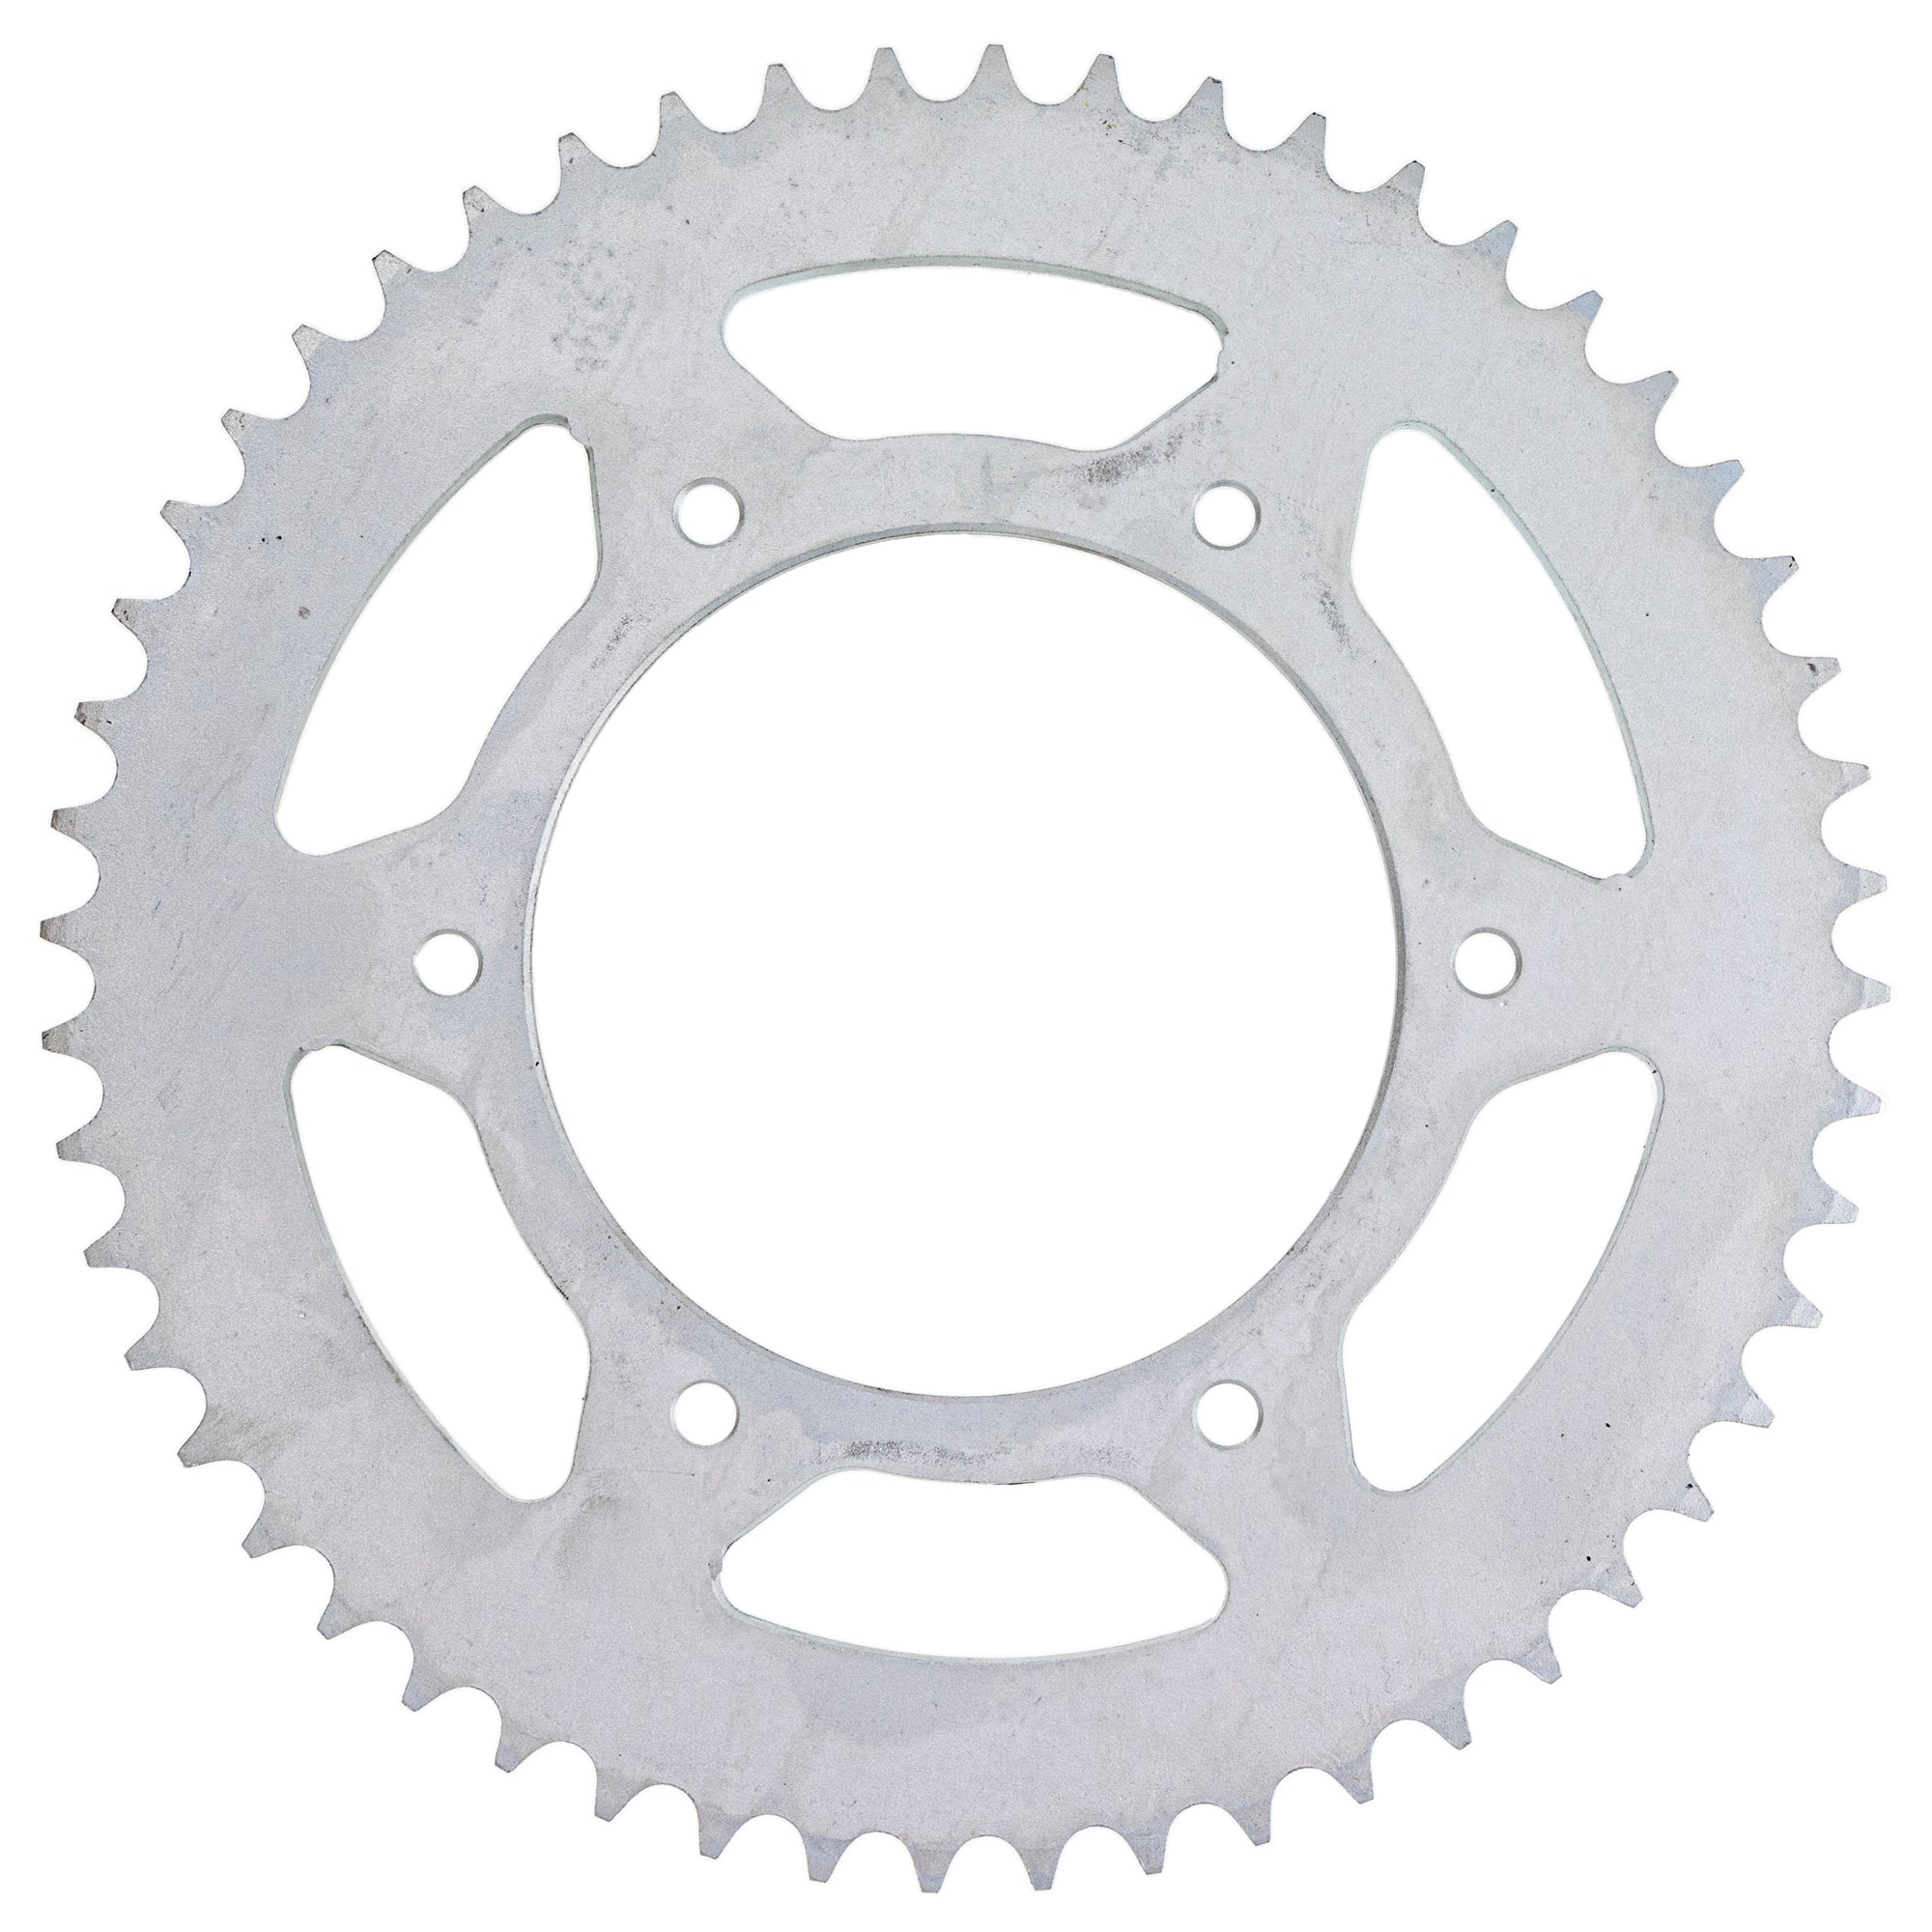 520 Pitch Front 14T Rear 52T Drive Sprocket Kit for KTM 350 620